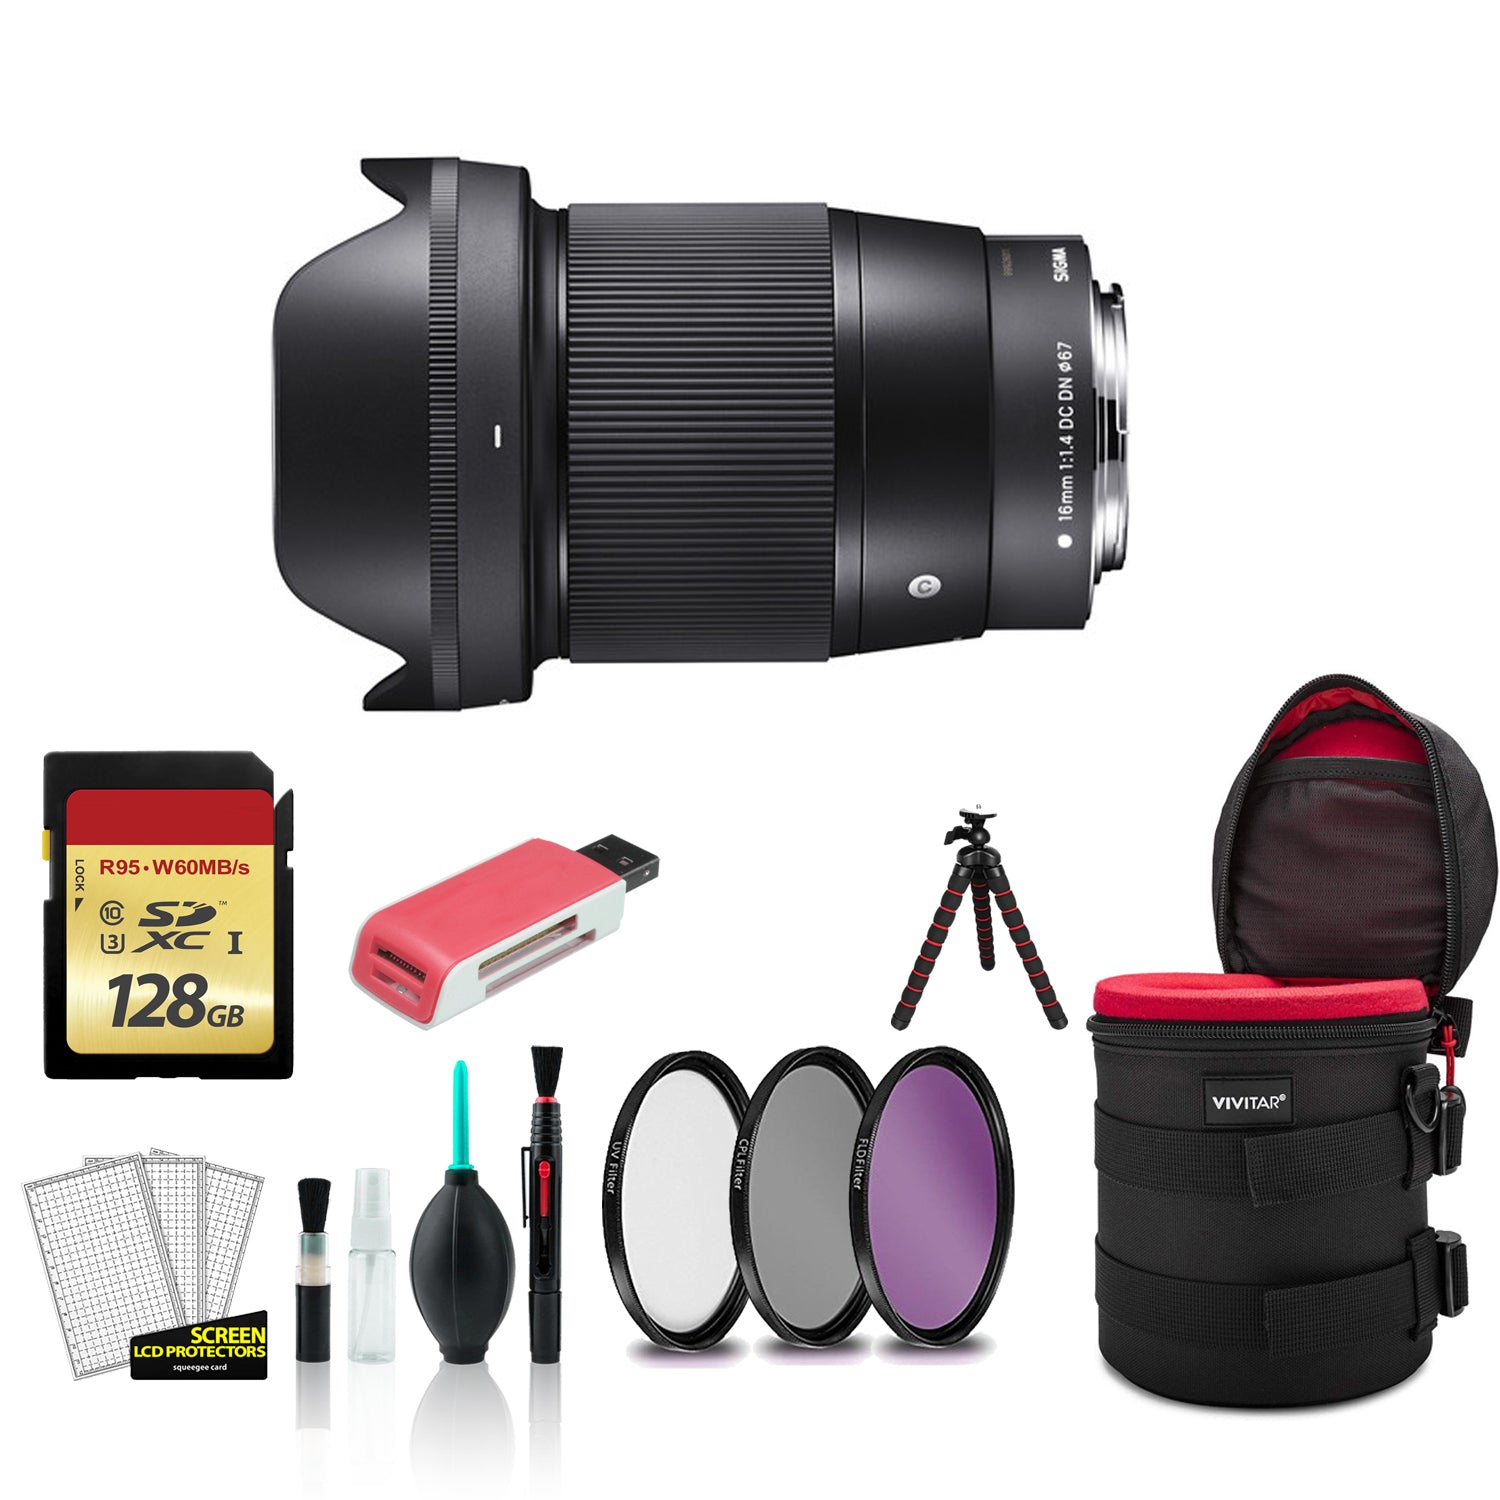 Sigma 16mm Contemporary Lens f/1.4 DC DN for Sony E 402965 with 128GB Memory Card + Padded Case Bundle